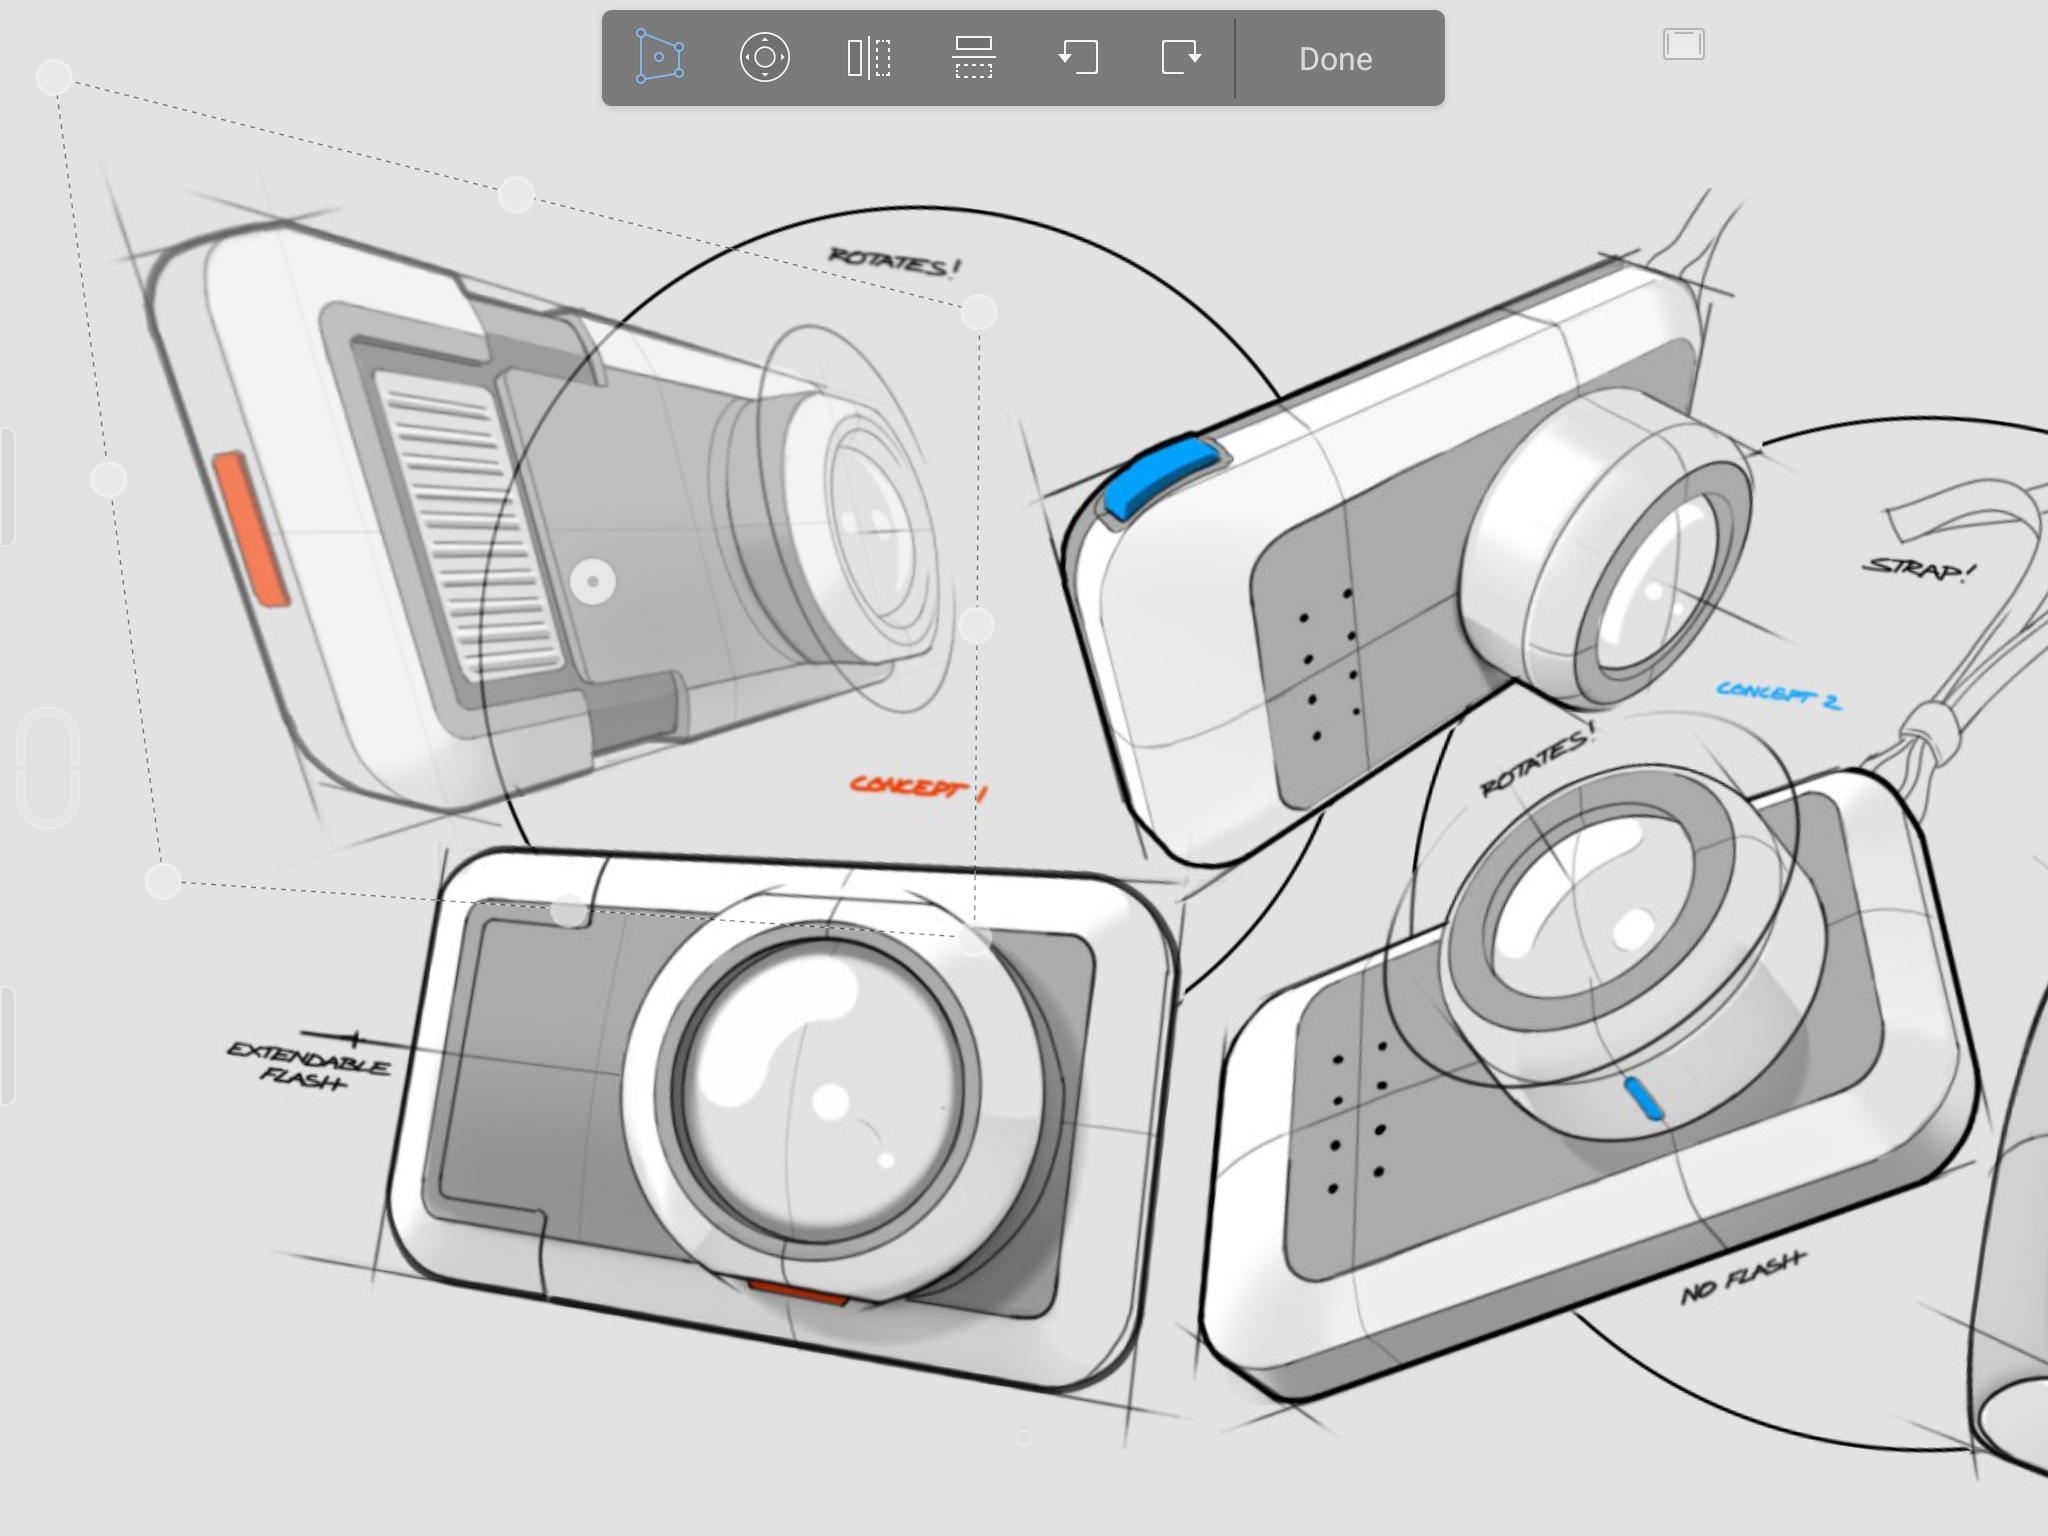 SketchBook - draw and paint 5.2.2 Screenshot 9